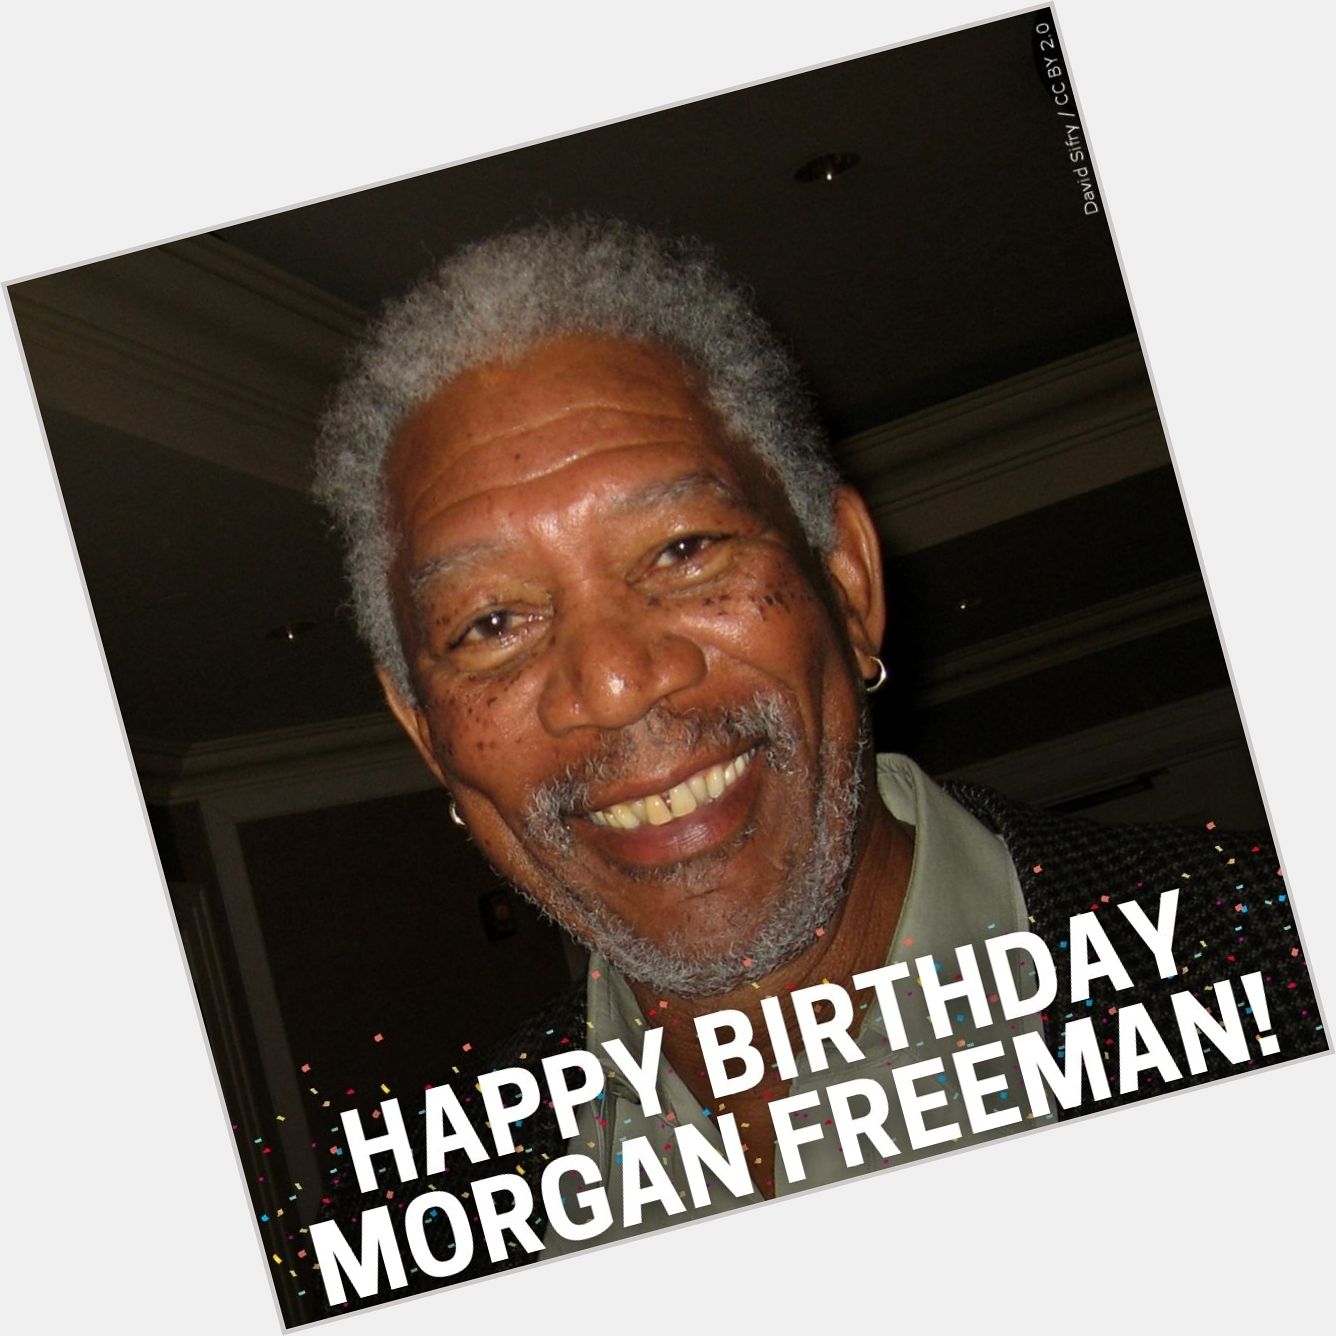  How do we change the world? One random act of kindness at a time. HAPPY BIRTHDAY, MORGAN FREEMAN!    